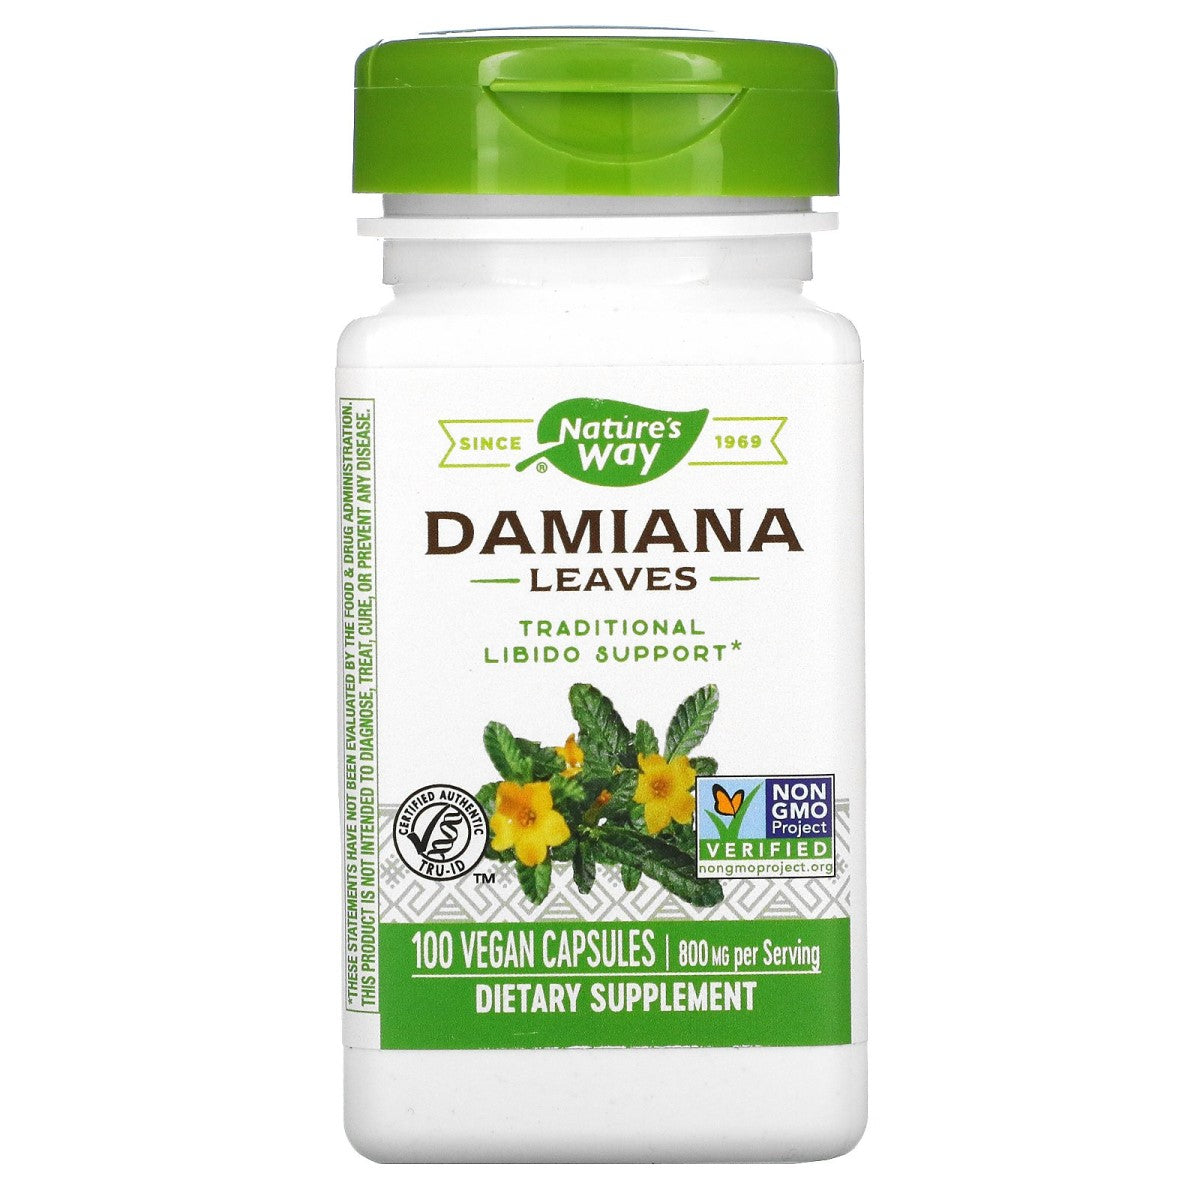 Primary image of Damiana Leaves